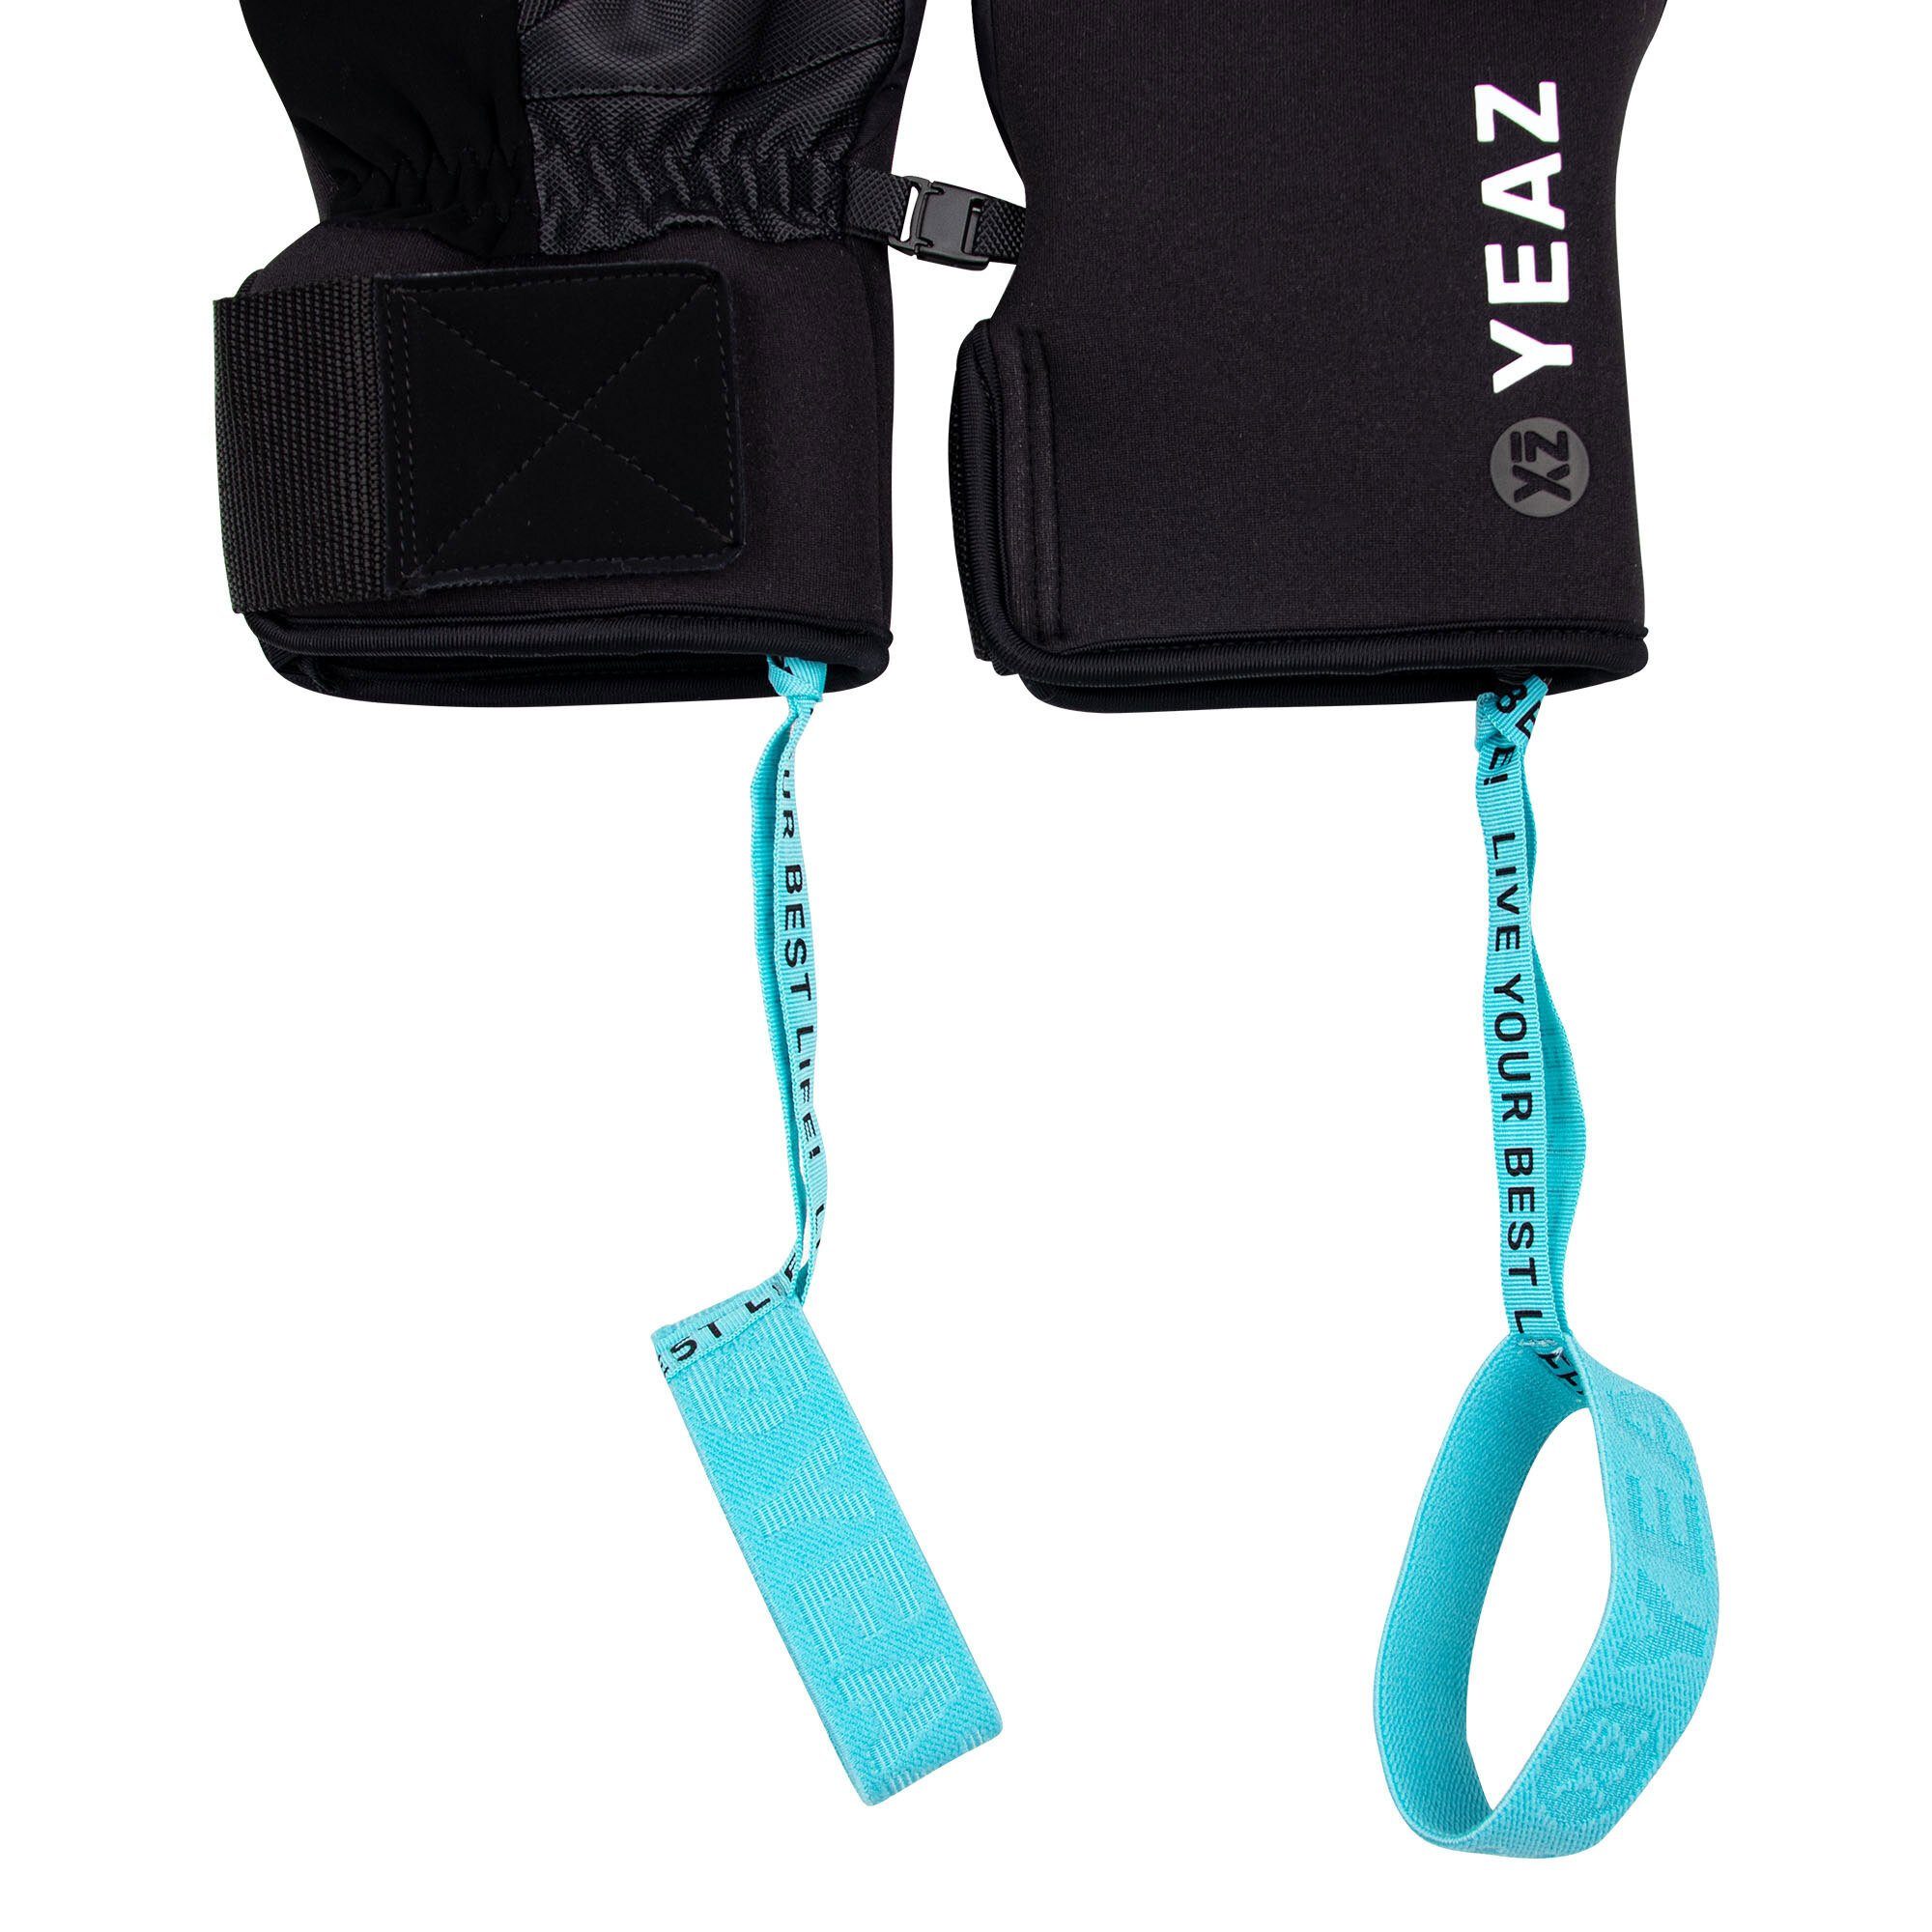 YEAZ Skihandschuhe Wrist-Band Touch-Funktion POW & fausthandschuhe